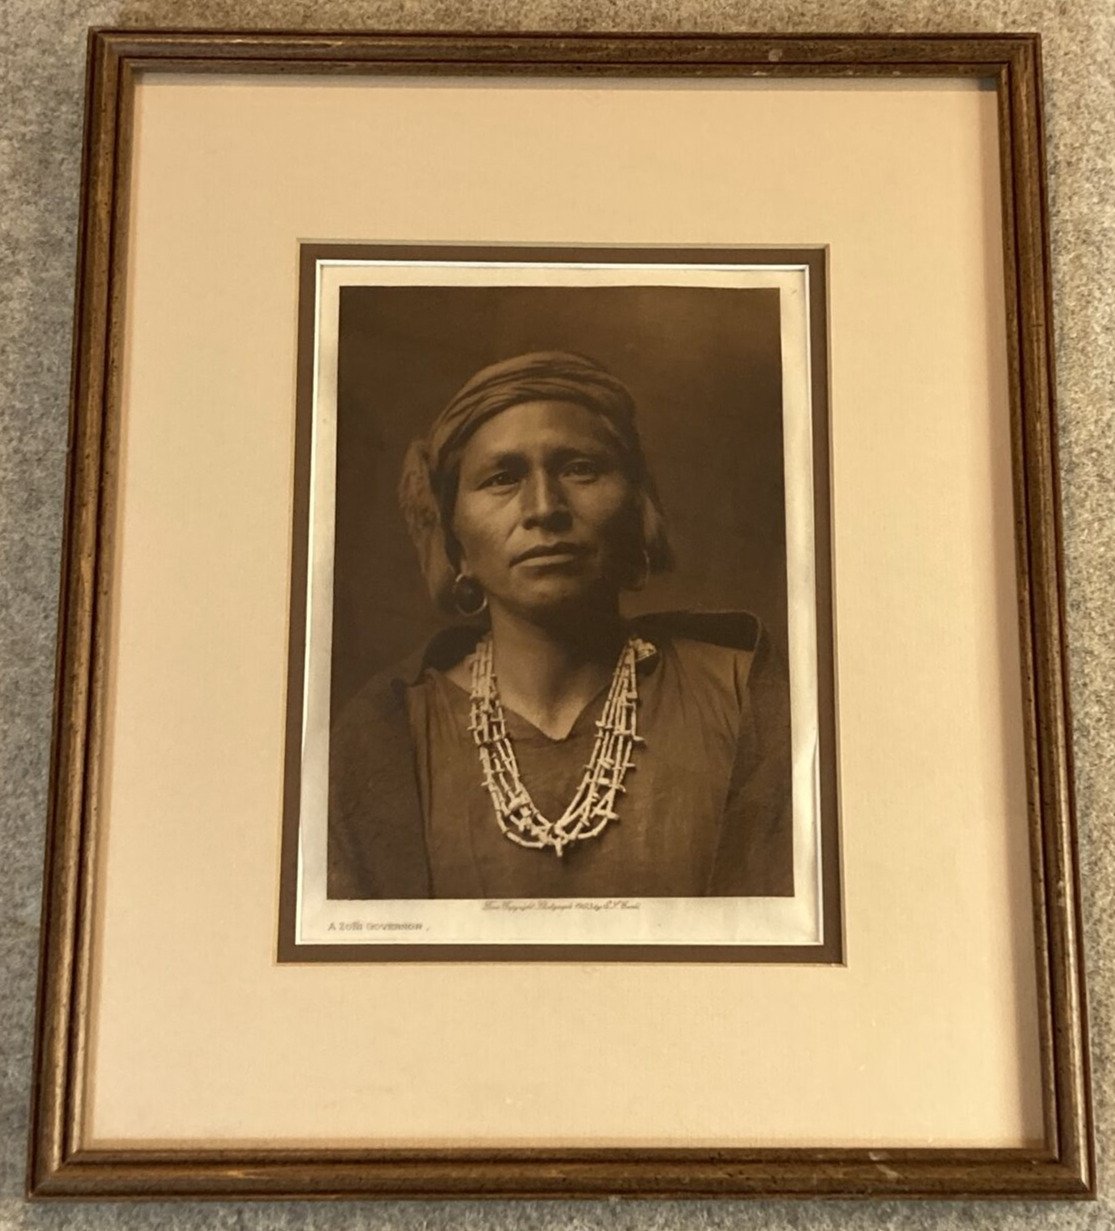 A Zuni Governor by Edward S. Curtis 1903 Photogravure Framed